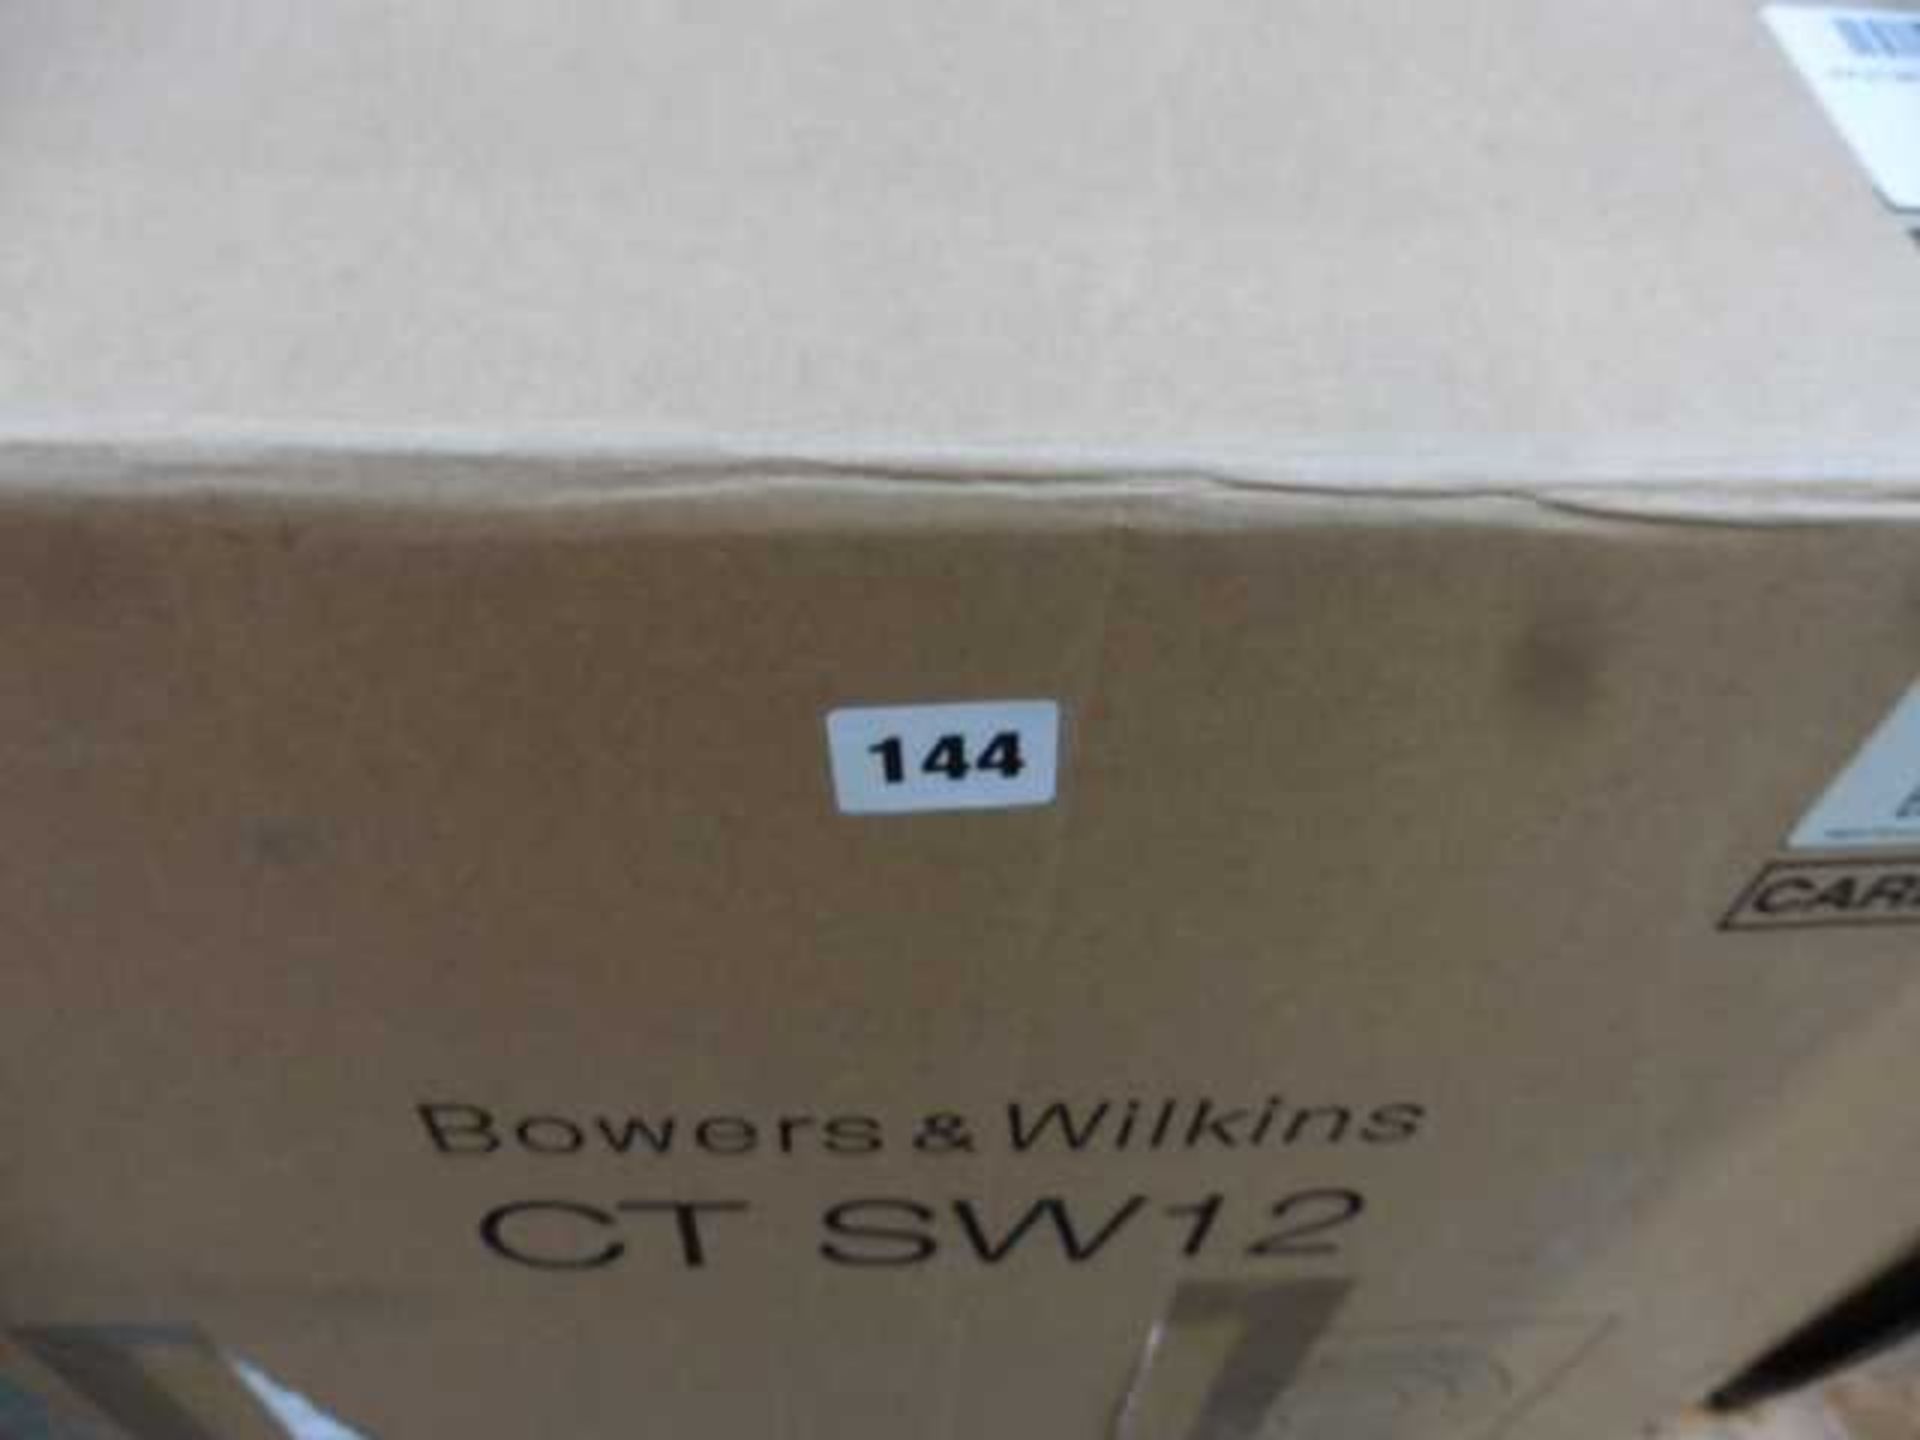 +VAT 2 Bowers & Wilkins CT SW12 black custom theatre speakers with boxes